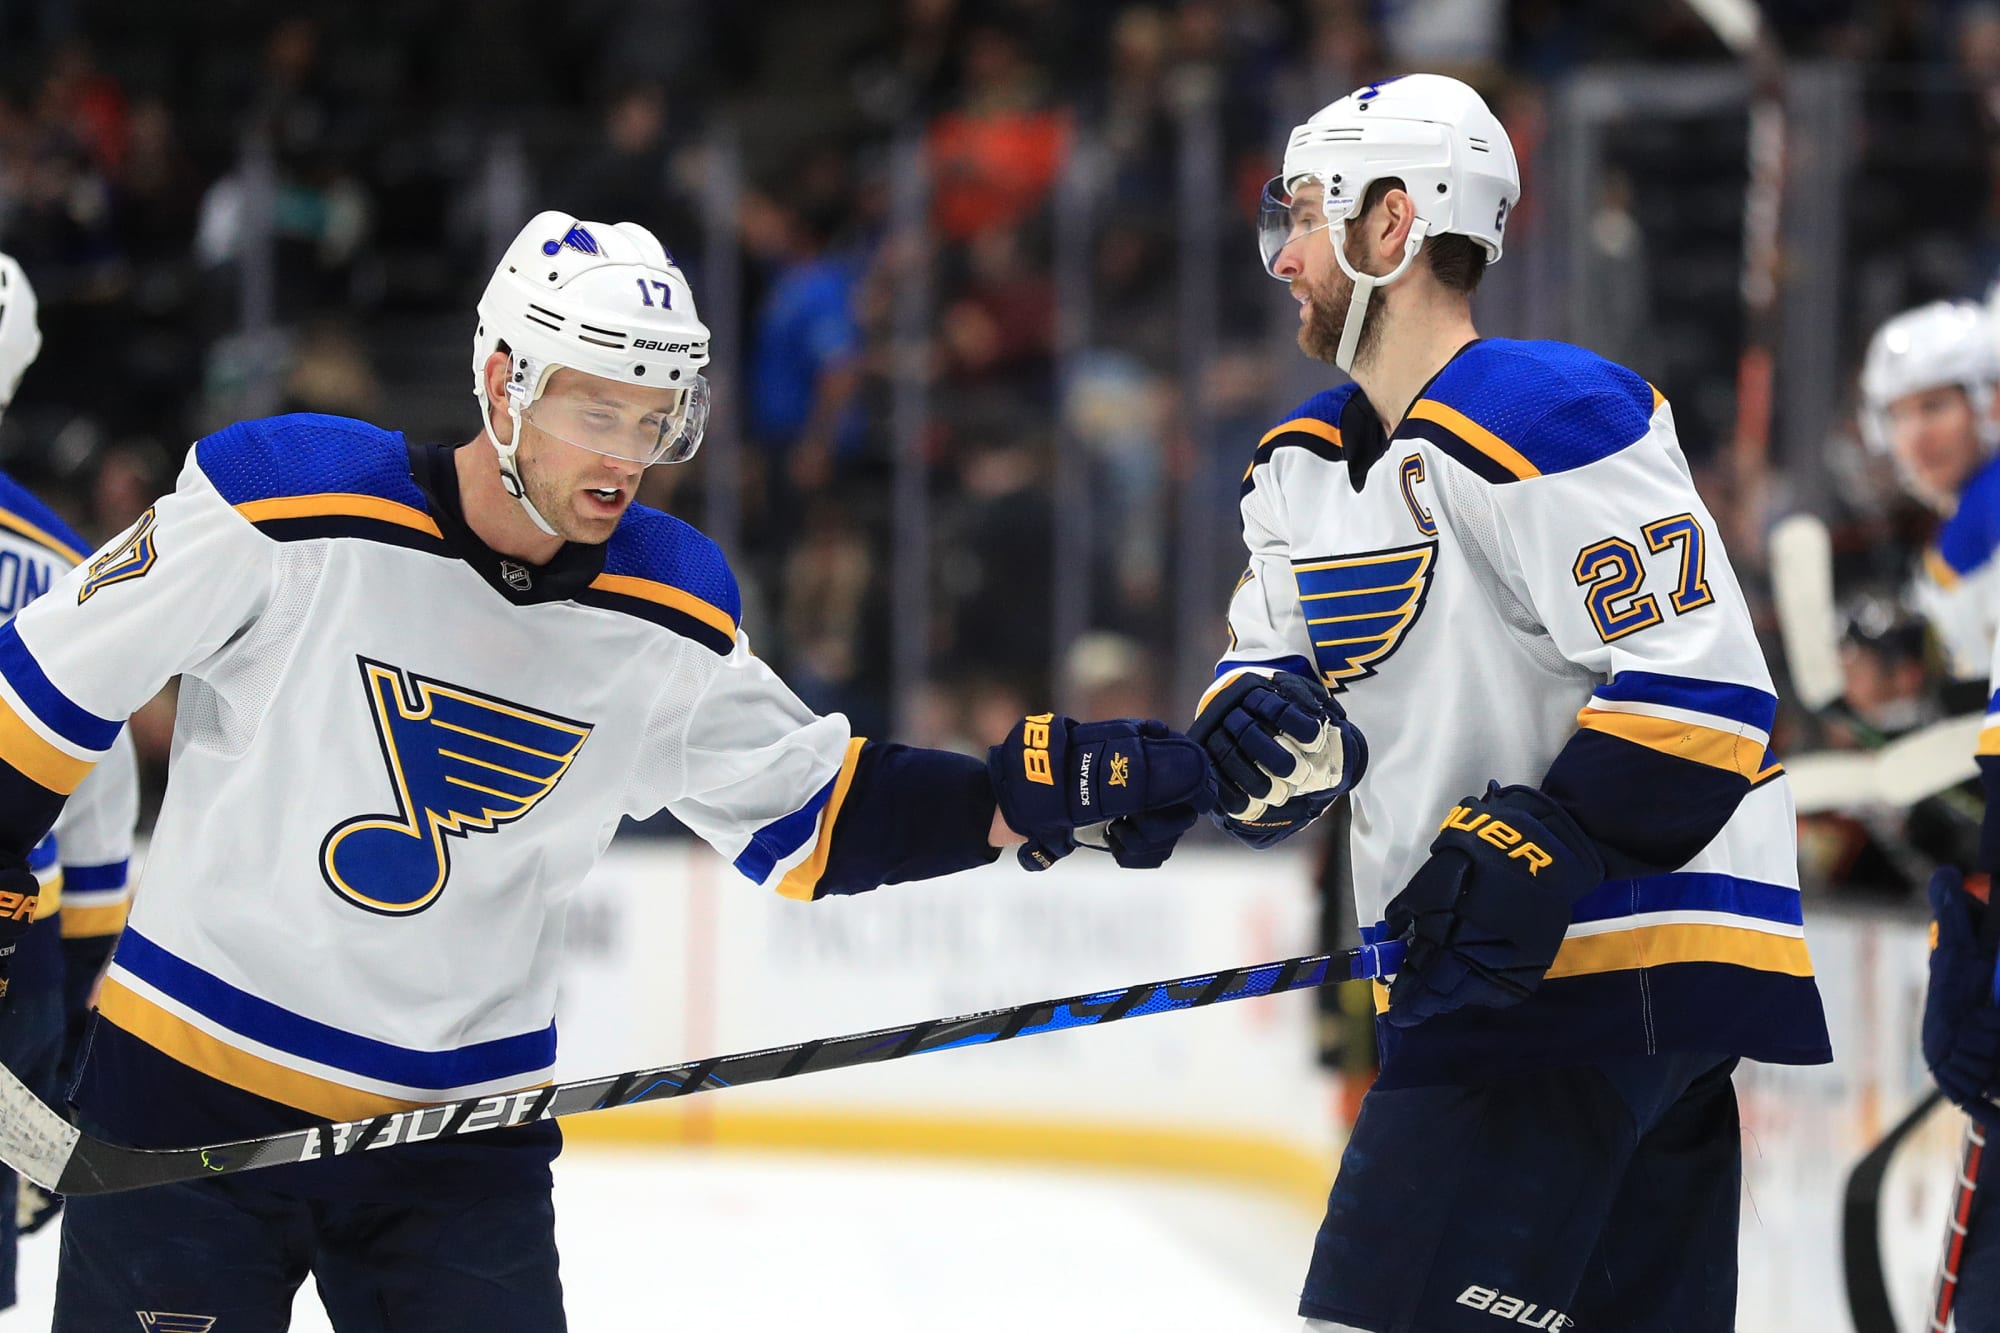 St. Louis Blues: Why Not Having Play-In Games Is Most Fair